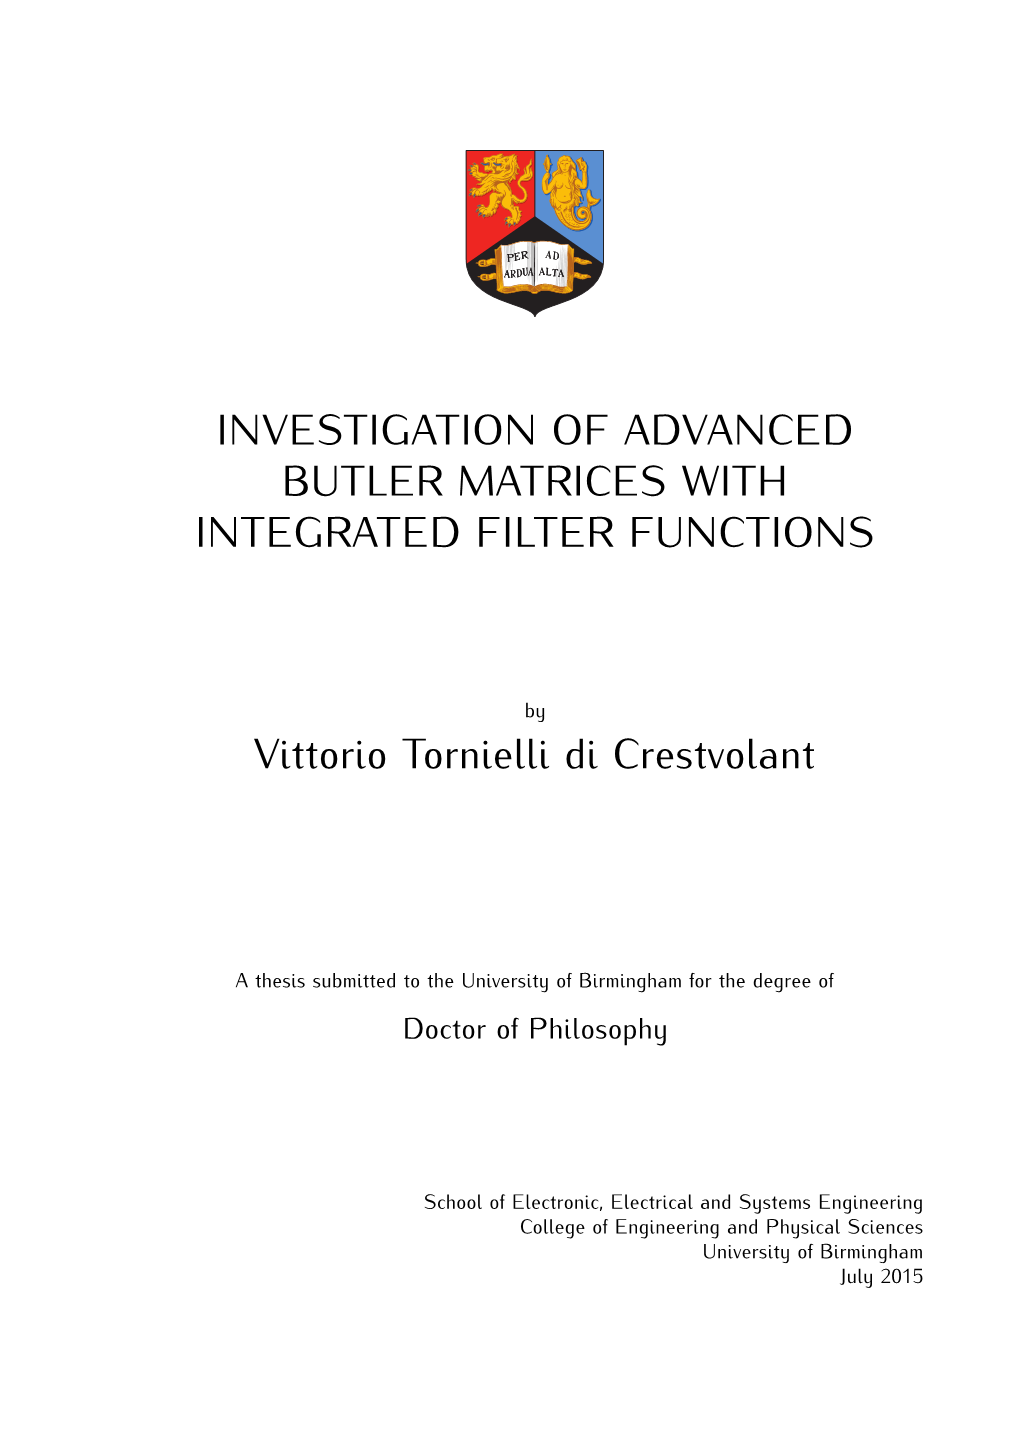 Investigation of Advanced Butler Matrices with Integrated Filter Functions